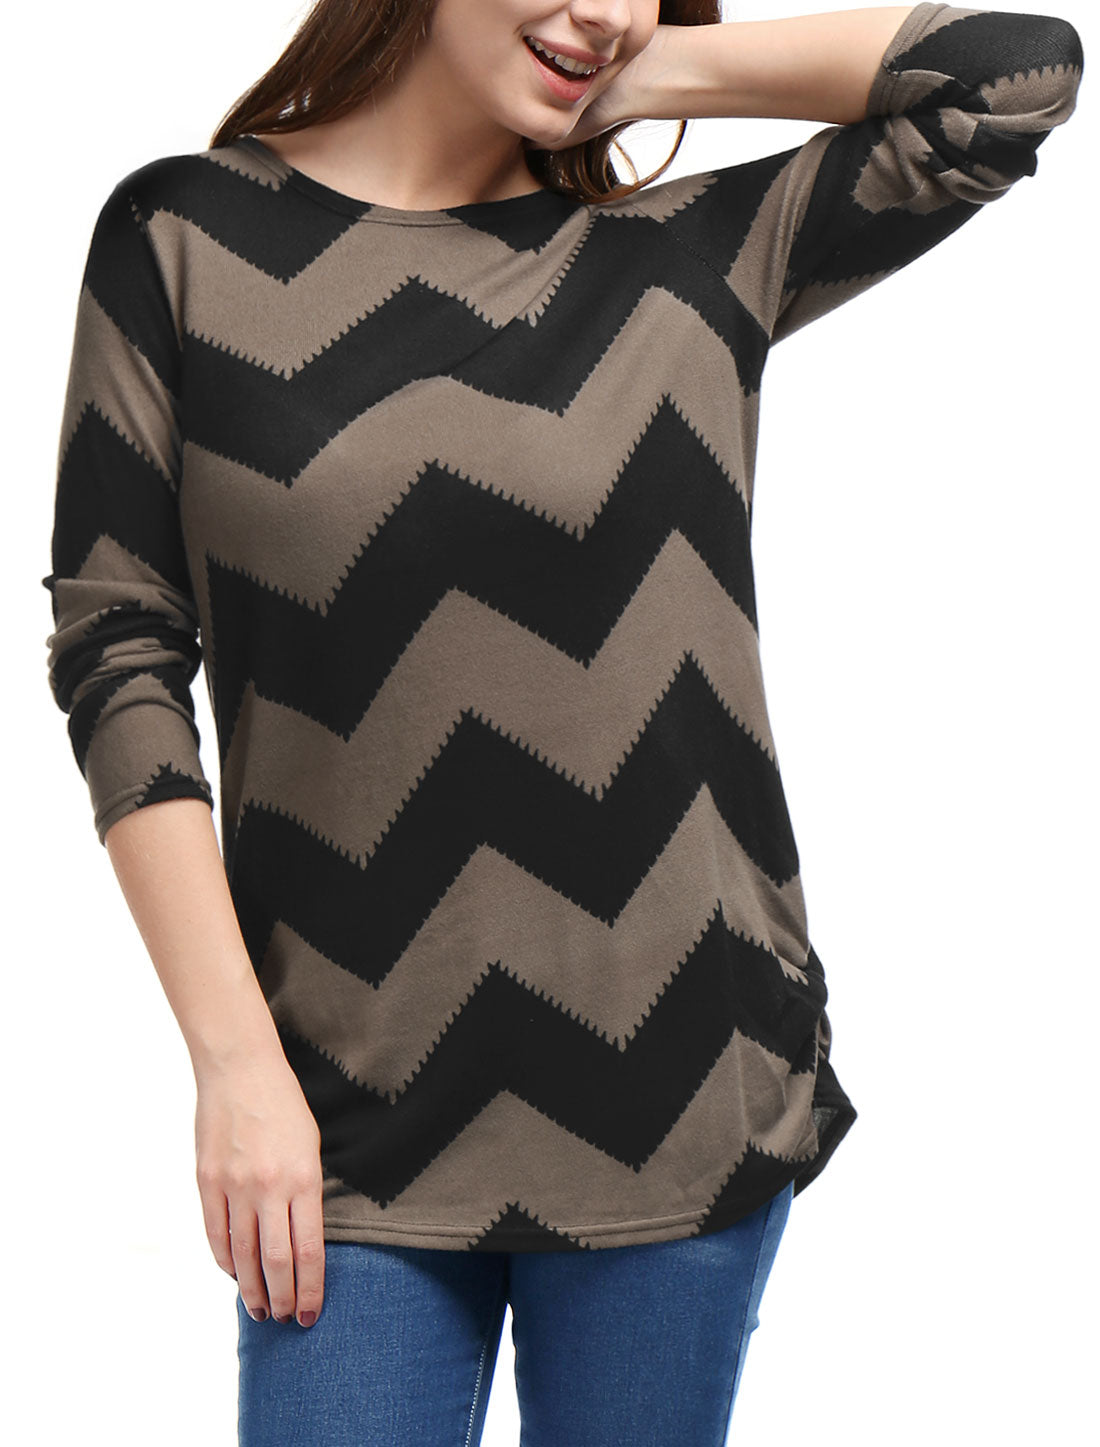 Allegra K Round Neck Contrast Color Knitted Shirt Long Sleeve Sweater Tops